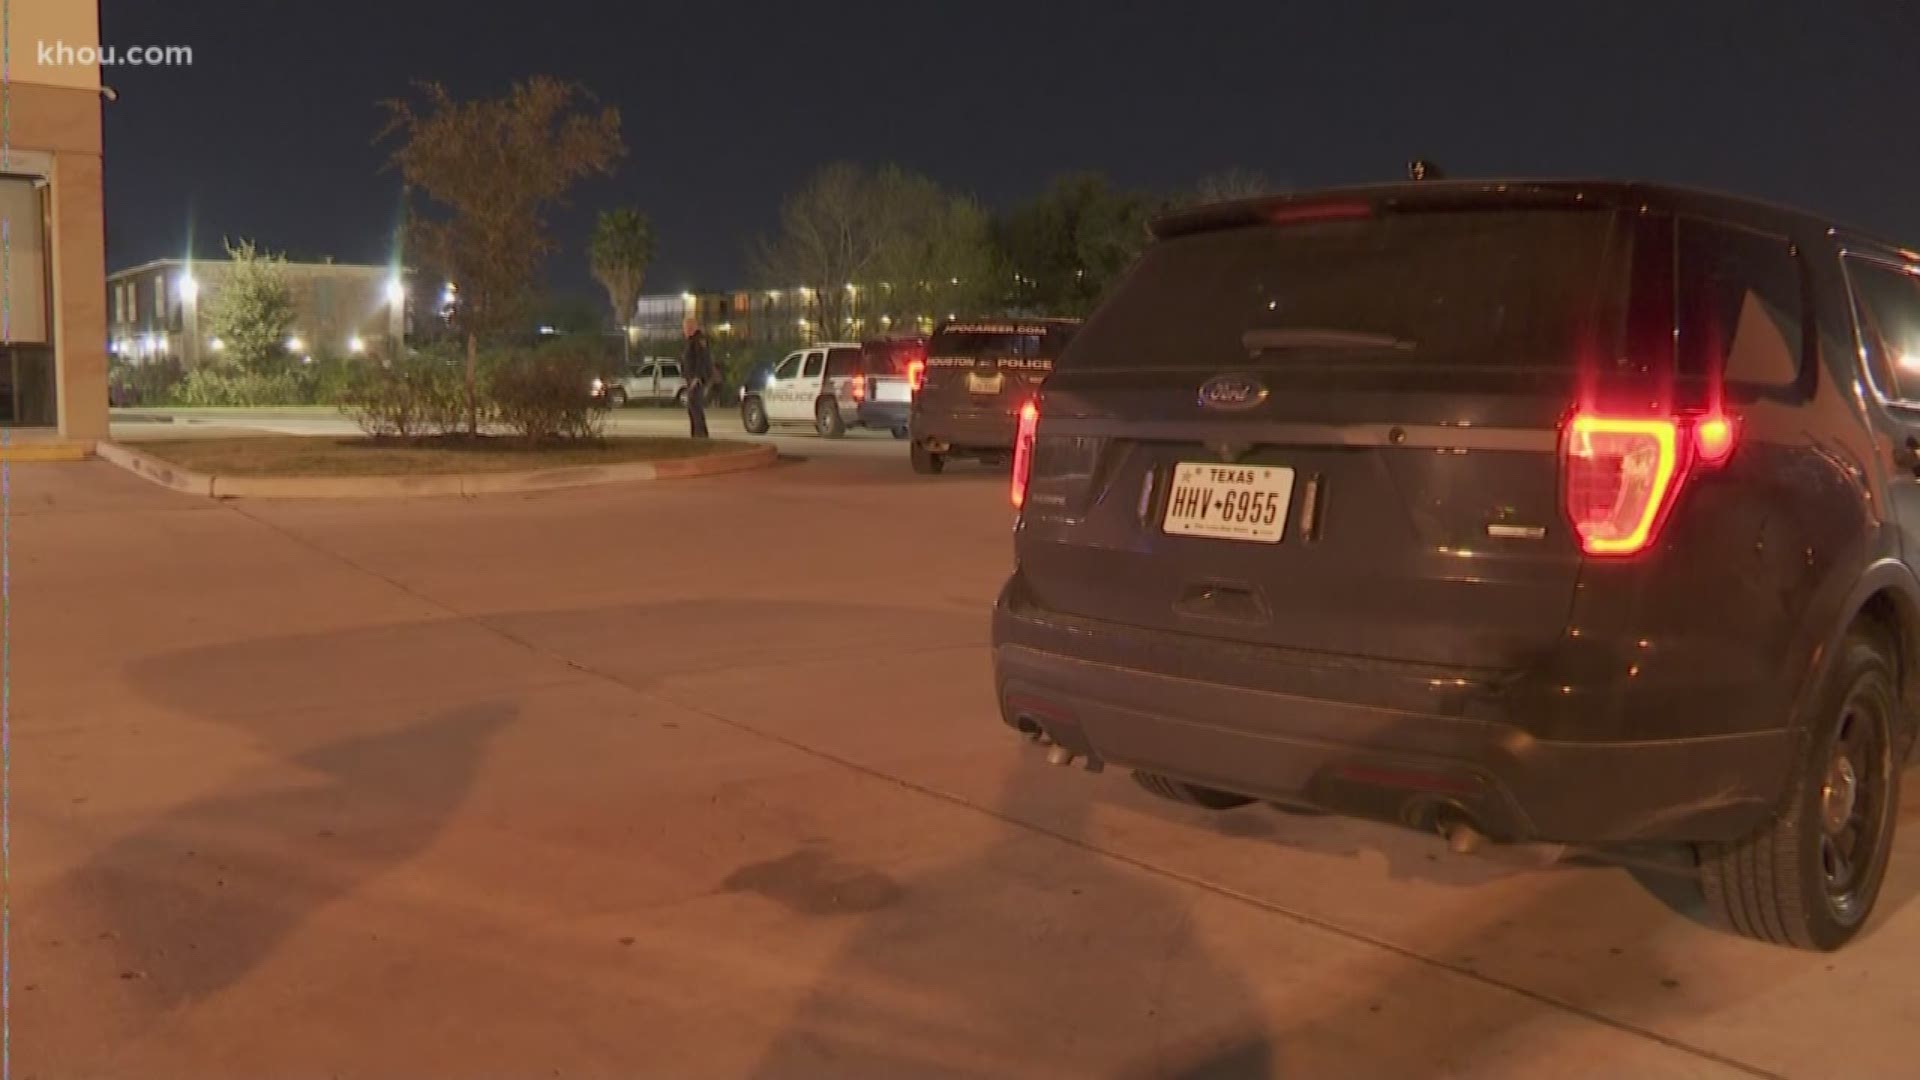 A man was shot in the neck during a carjacking Tuesday night in southwest Houston.